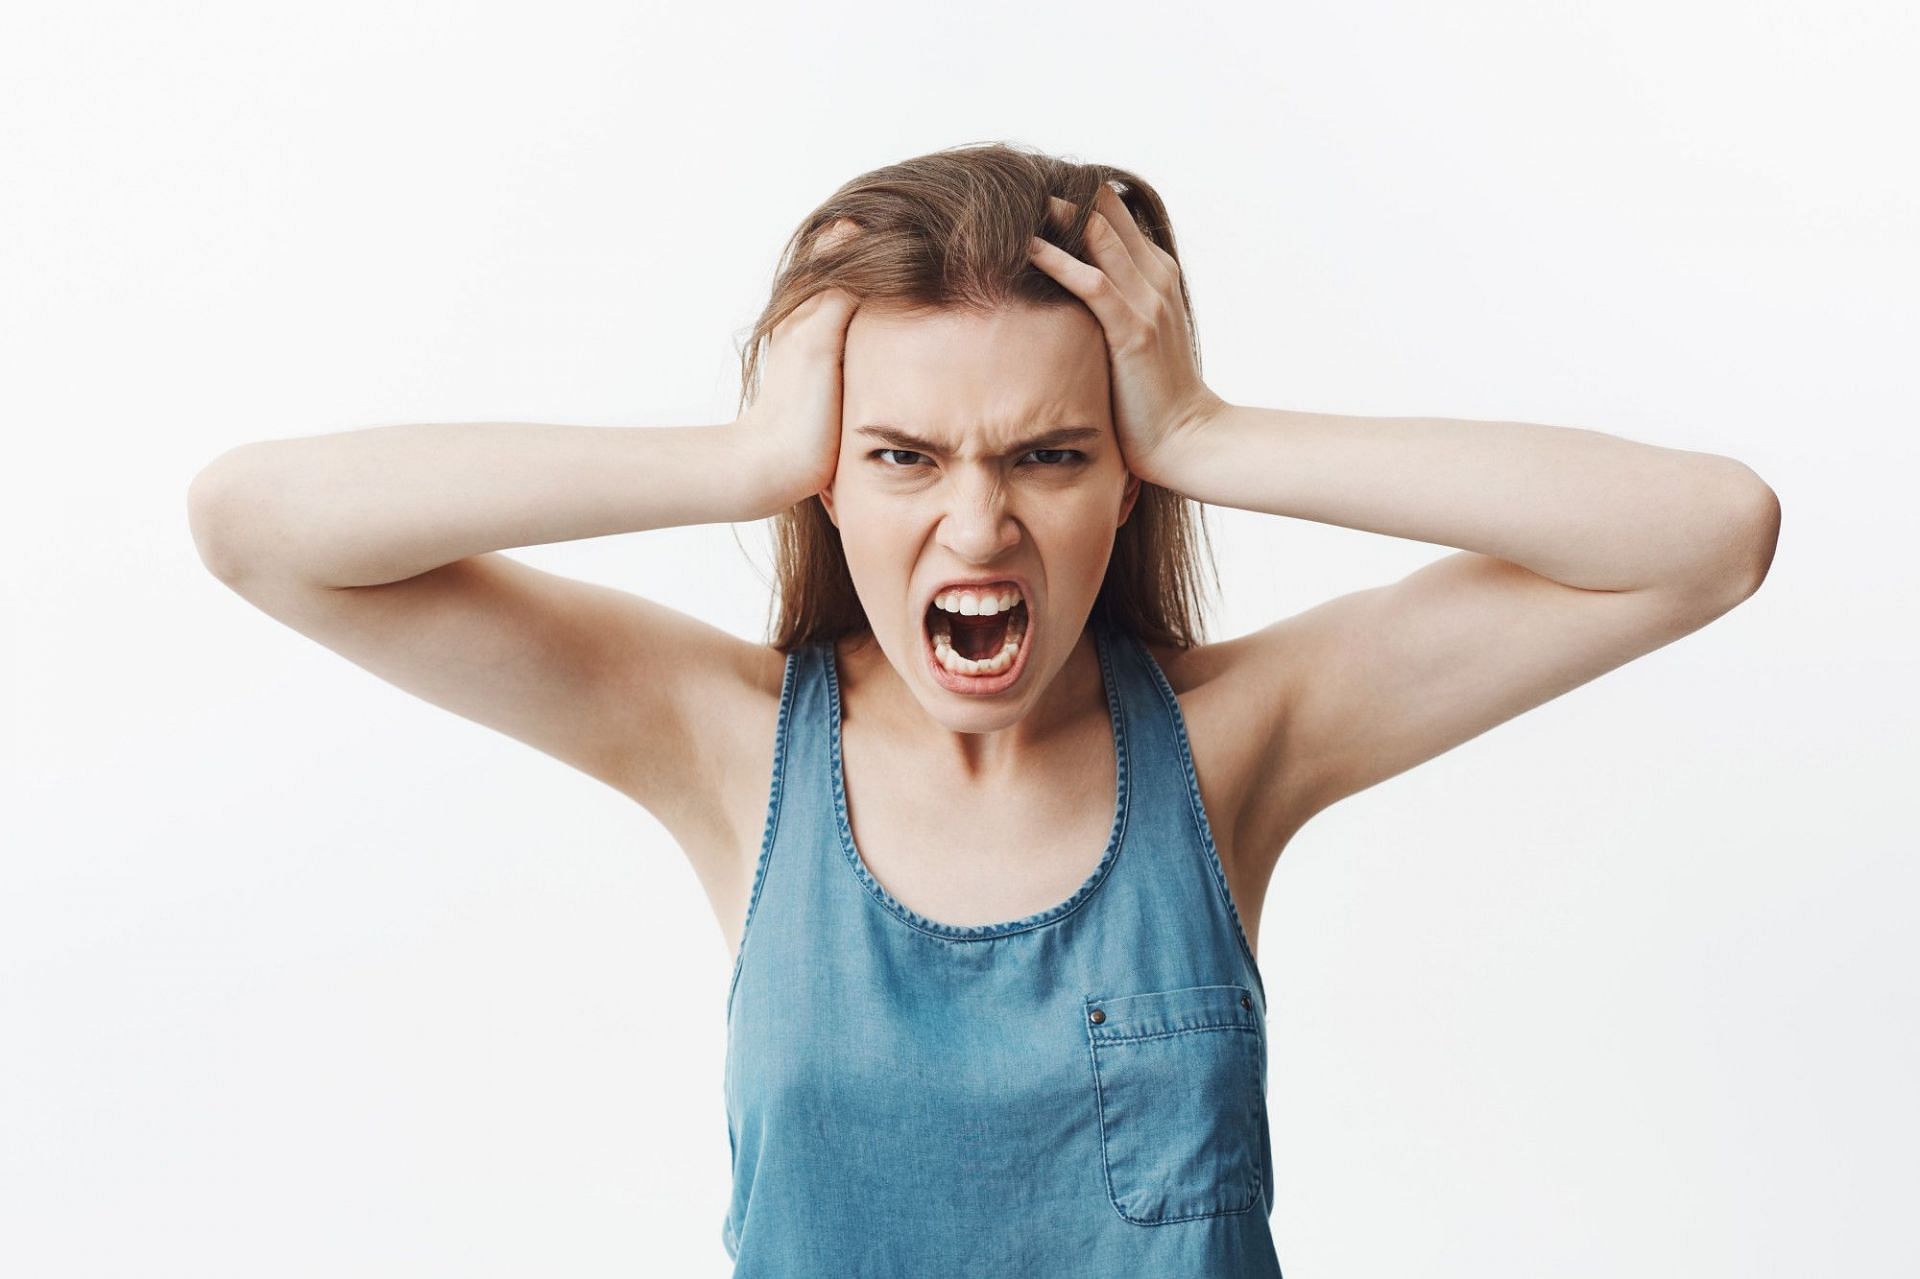 Panic attacks can make you feel mad (Image by cookie_studio on Freepik)